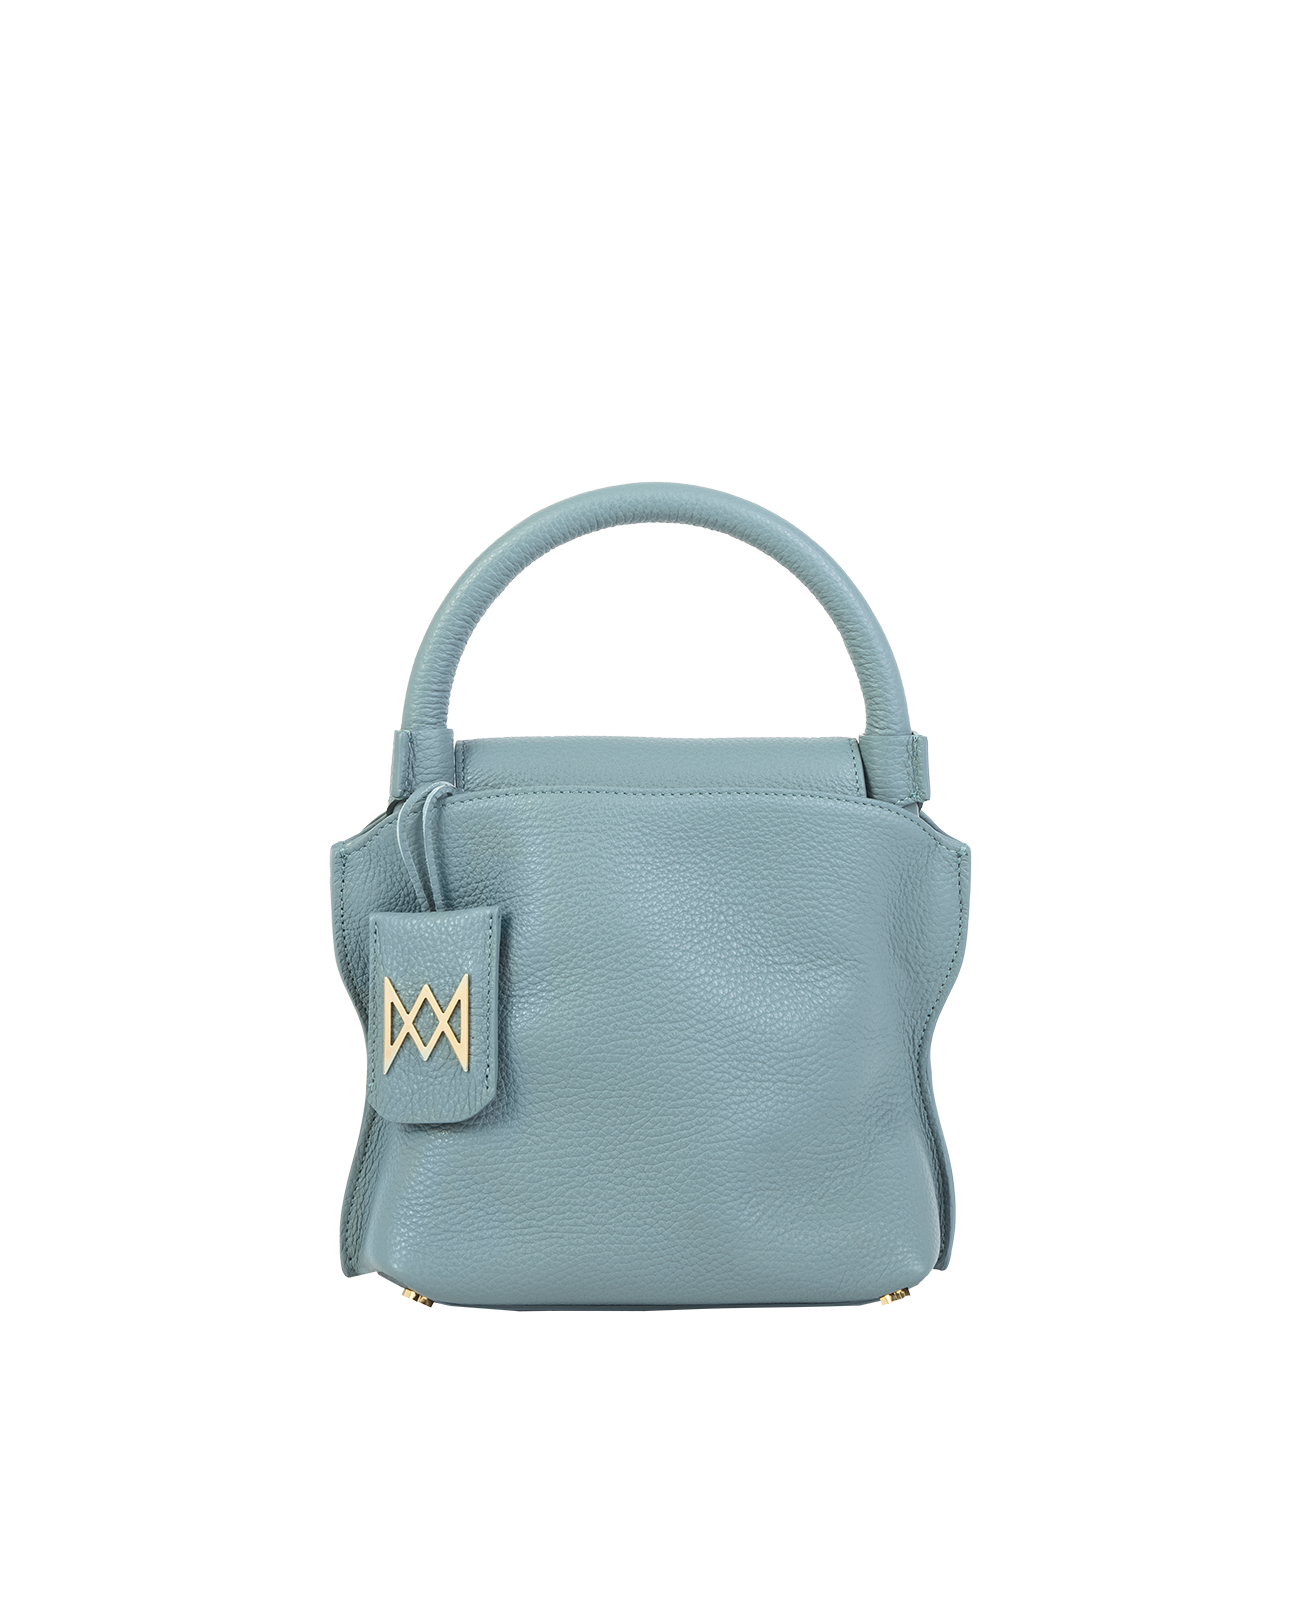 Cross-body bag in Italian full-grain leather, semi-aniline calf Italian leather with detachable shoulder strap.Three compartments, zip pocket in the back compartment. Magnetic flap closure with logo. Color: Light Blue. Size:Medium